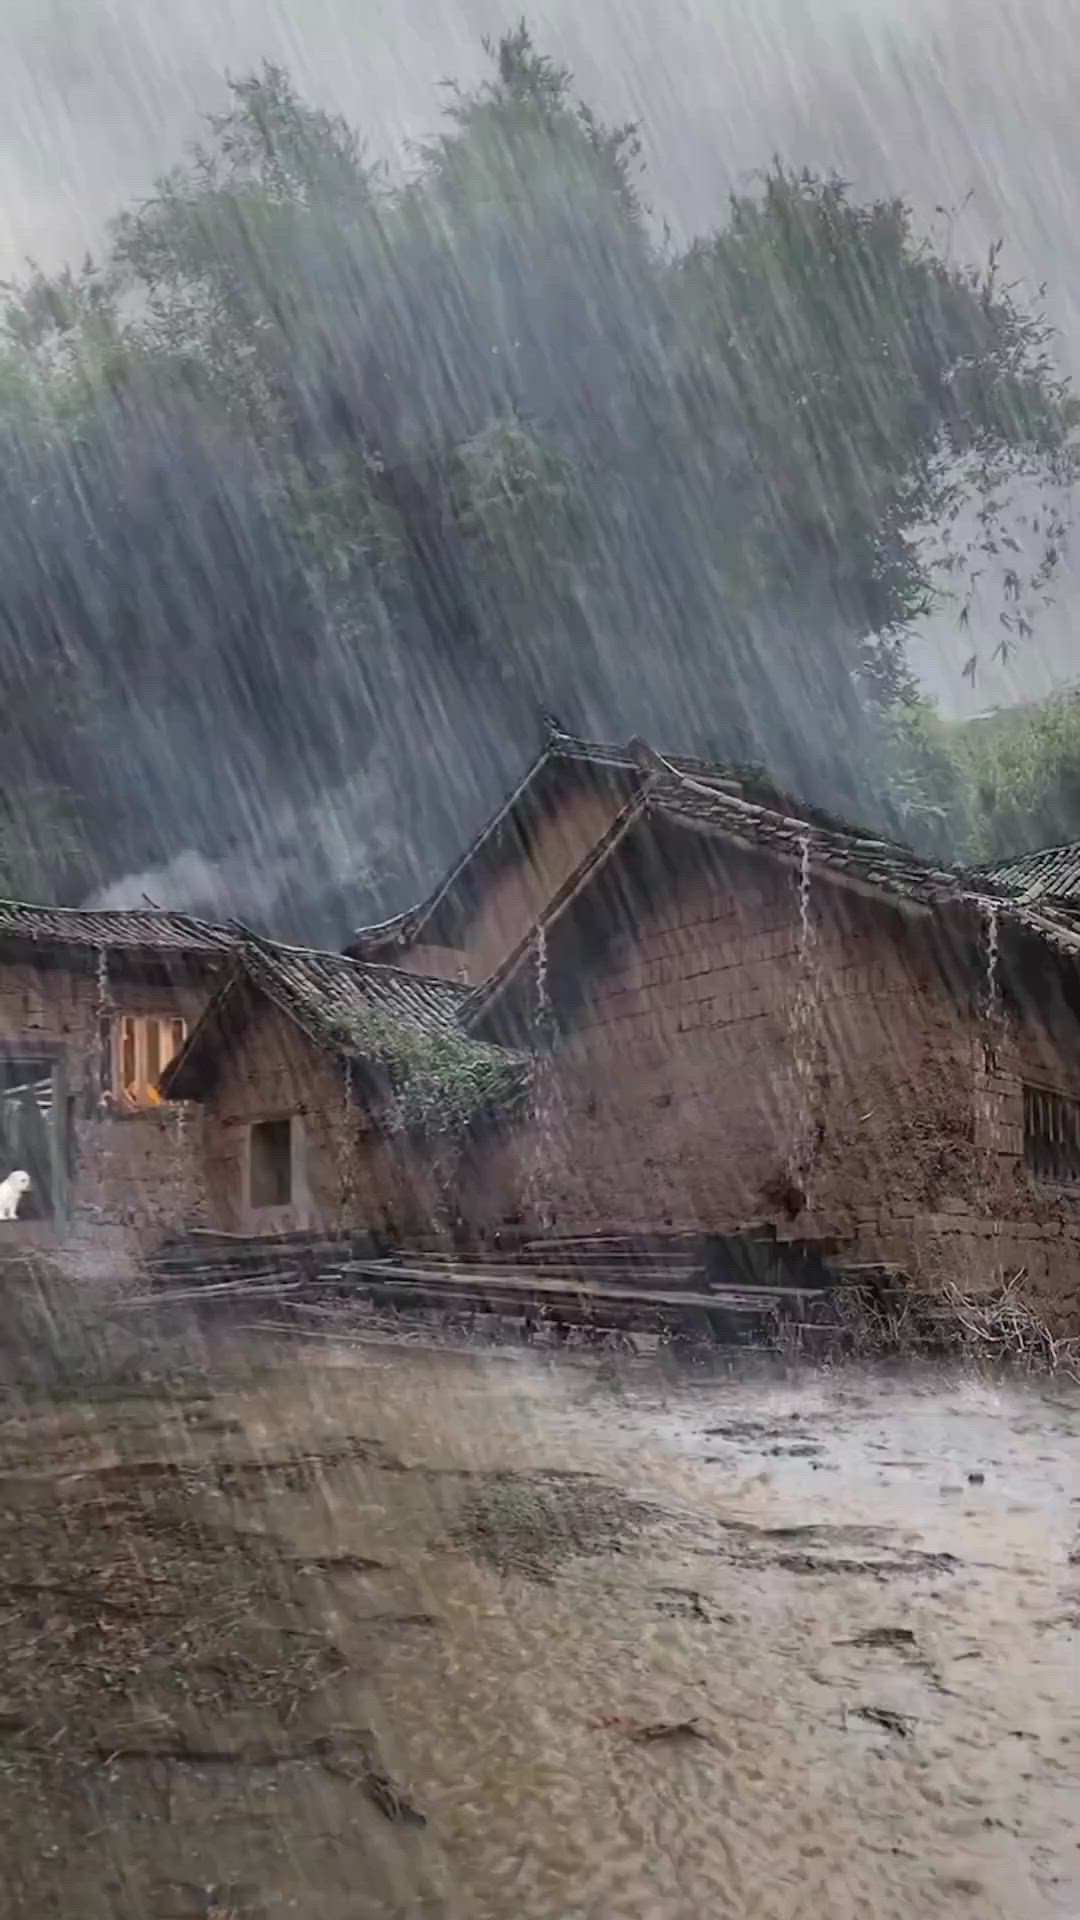 This may contain: an image of a house that is in the rain